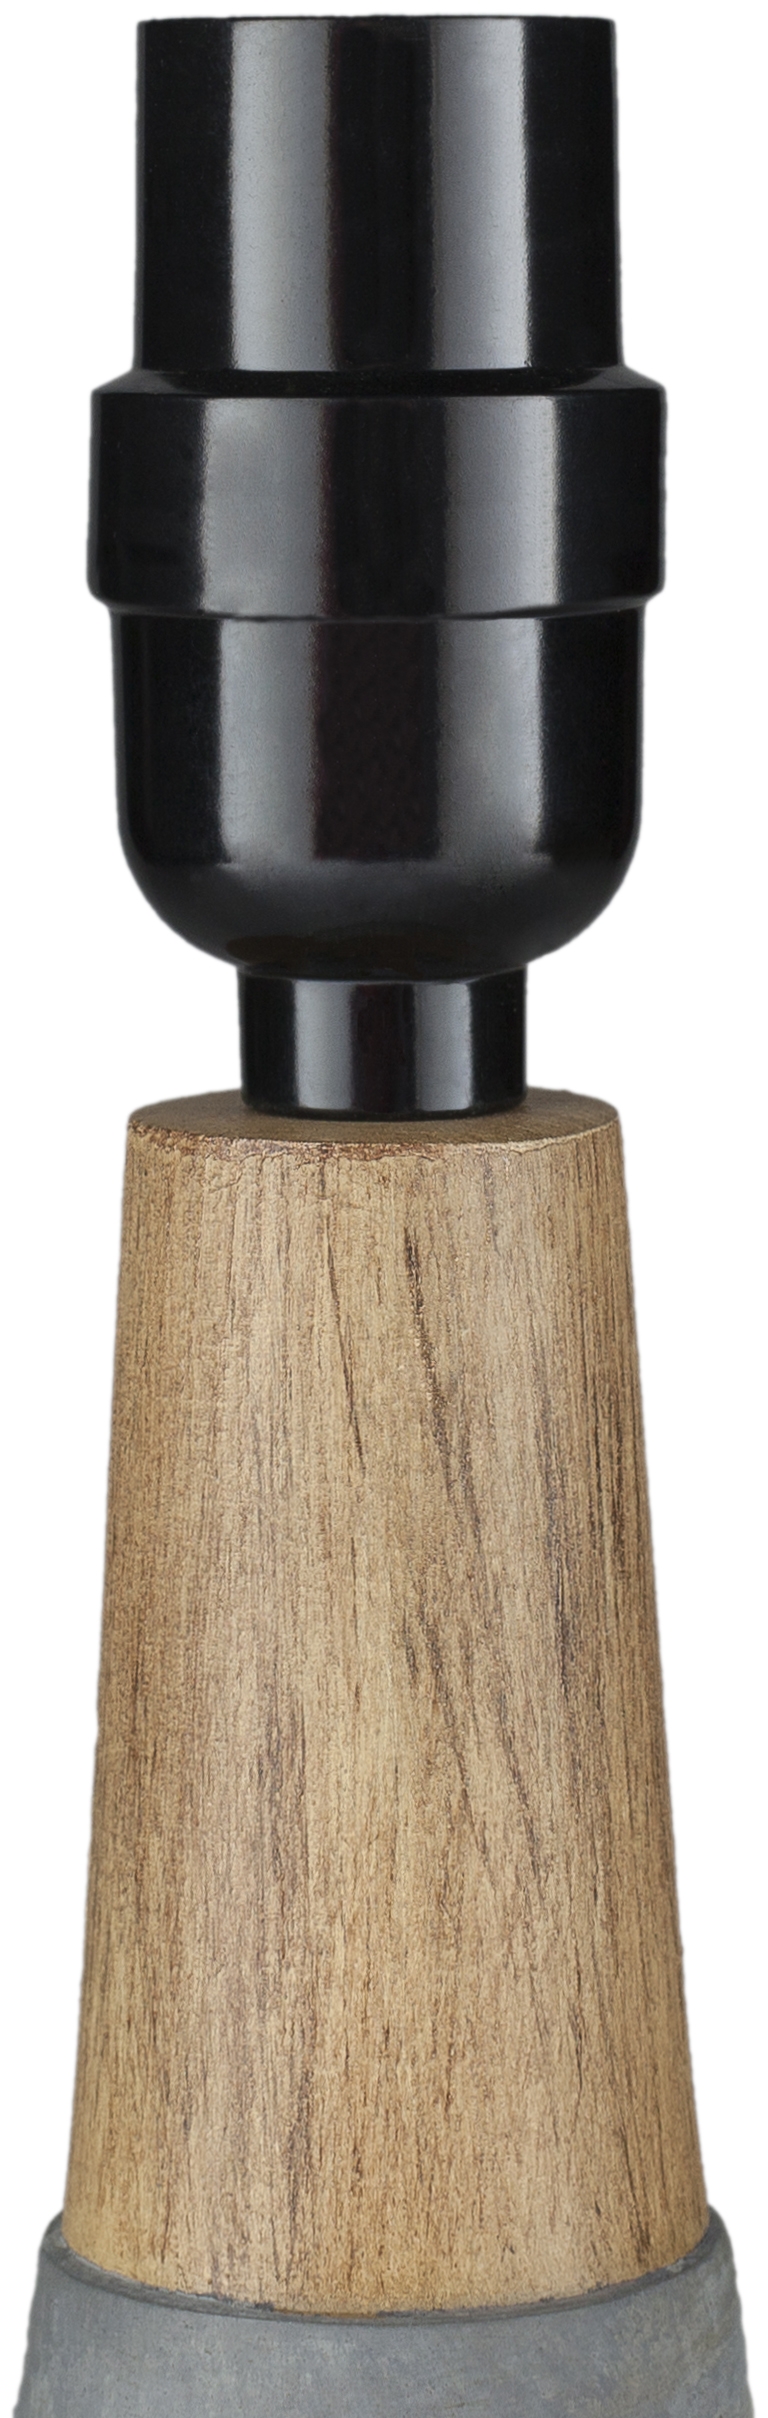 Marcella Table Lamp - Image 2